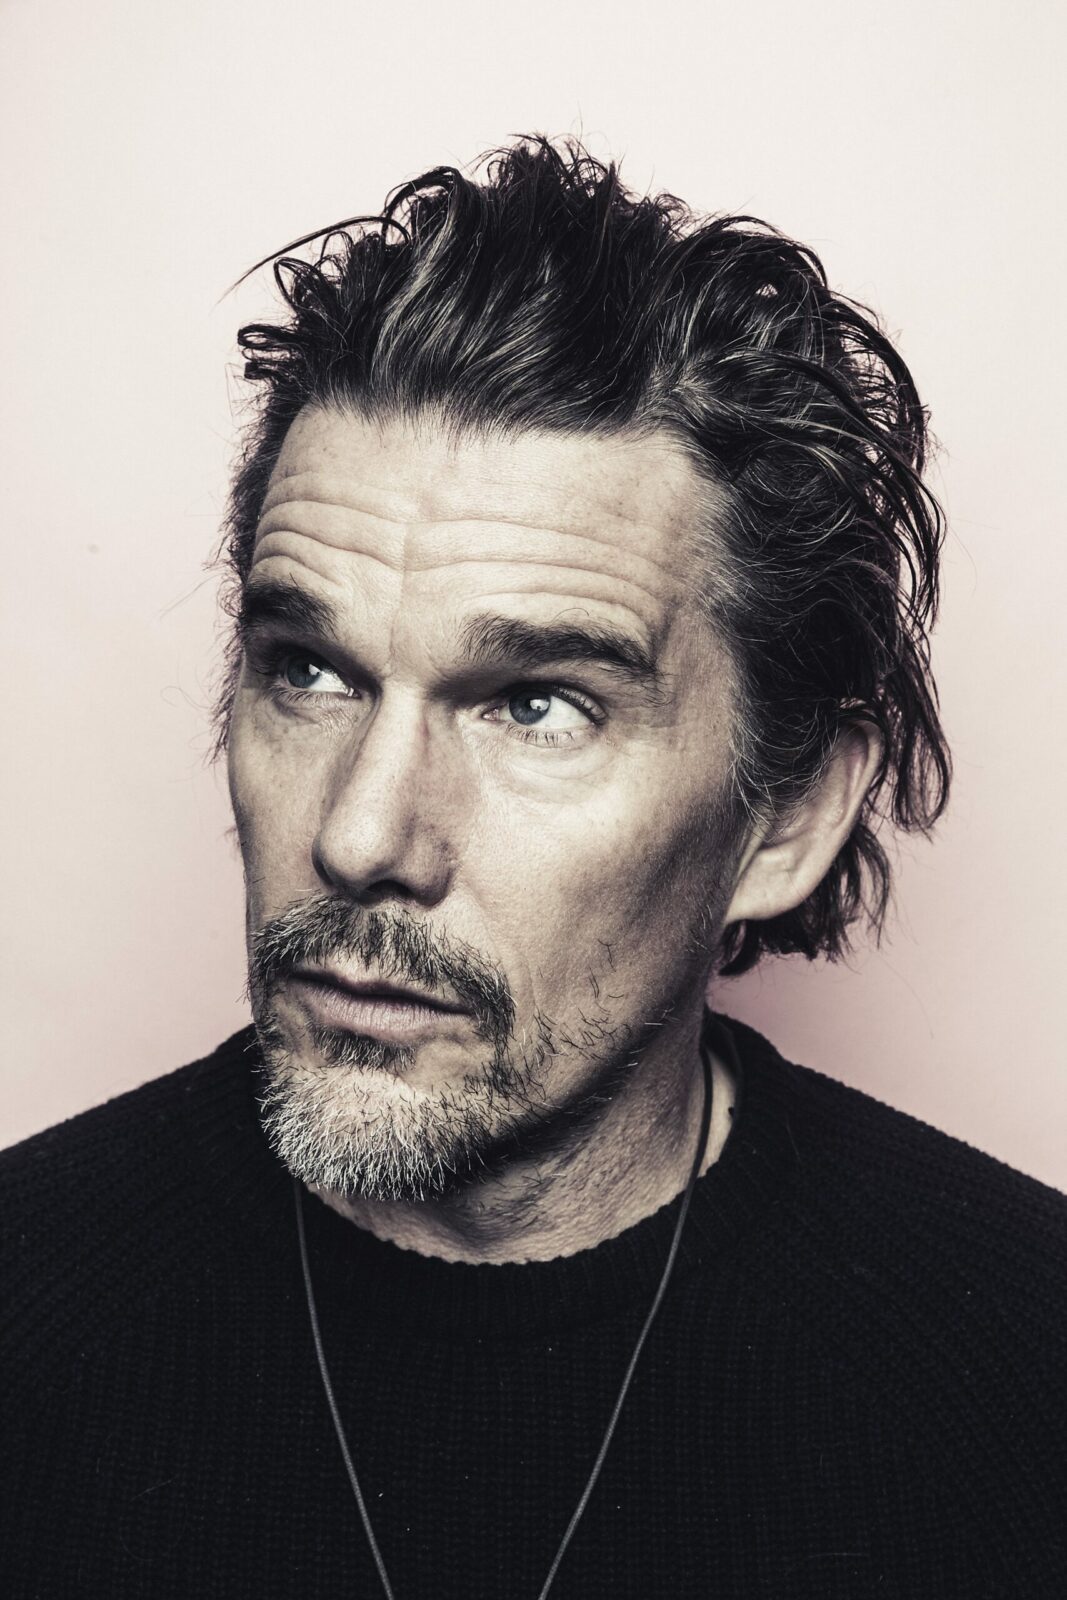 EH_-APPROVED-Headshot-Photographer-Francois-Berthier-Title-Ethan-Hawke-Paris-Match-November-29-2019-min-scaled